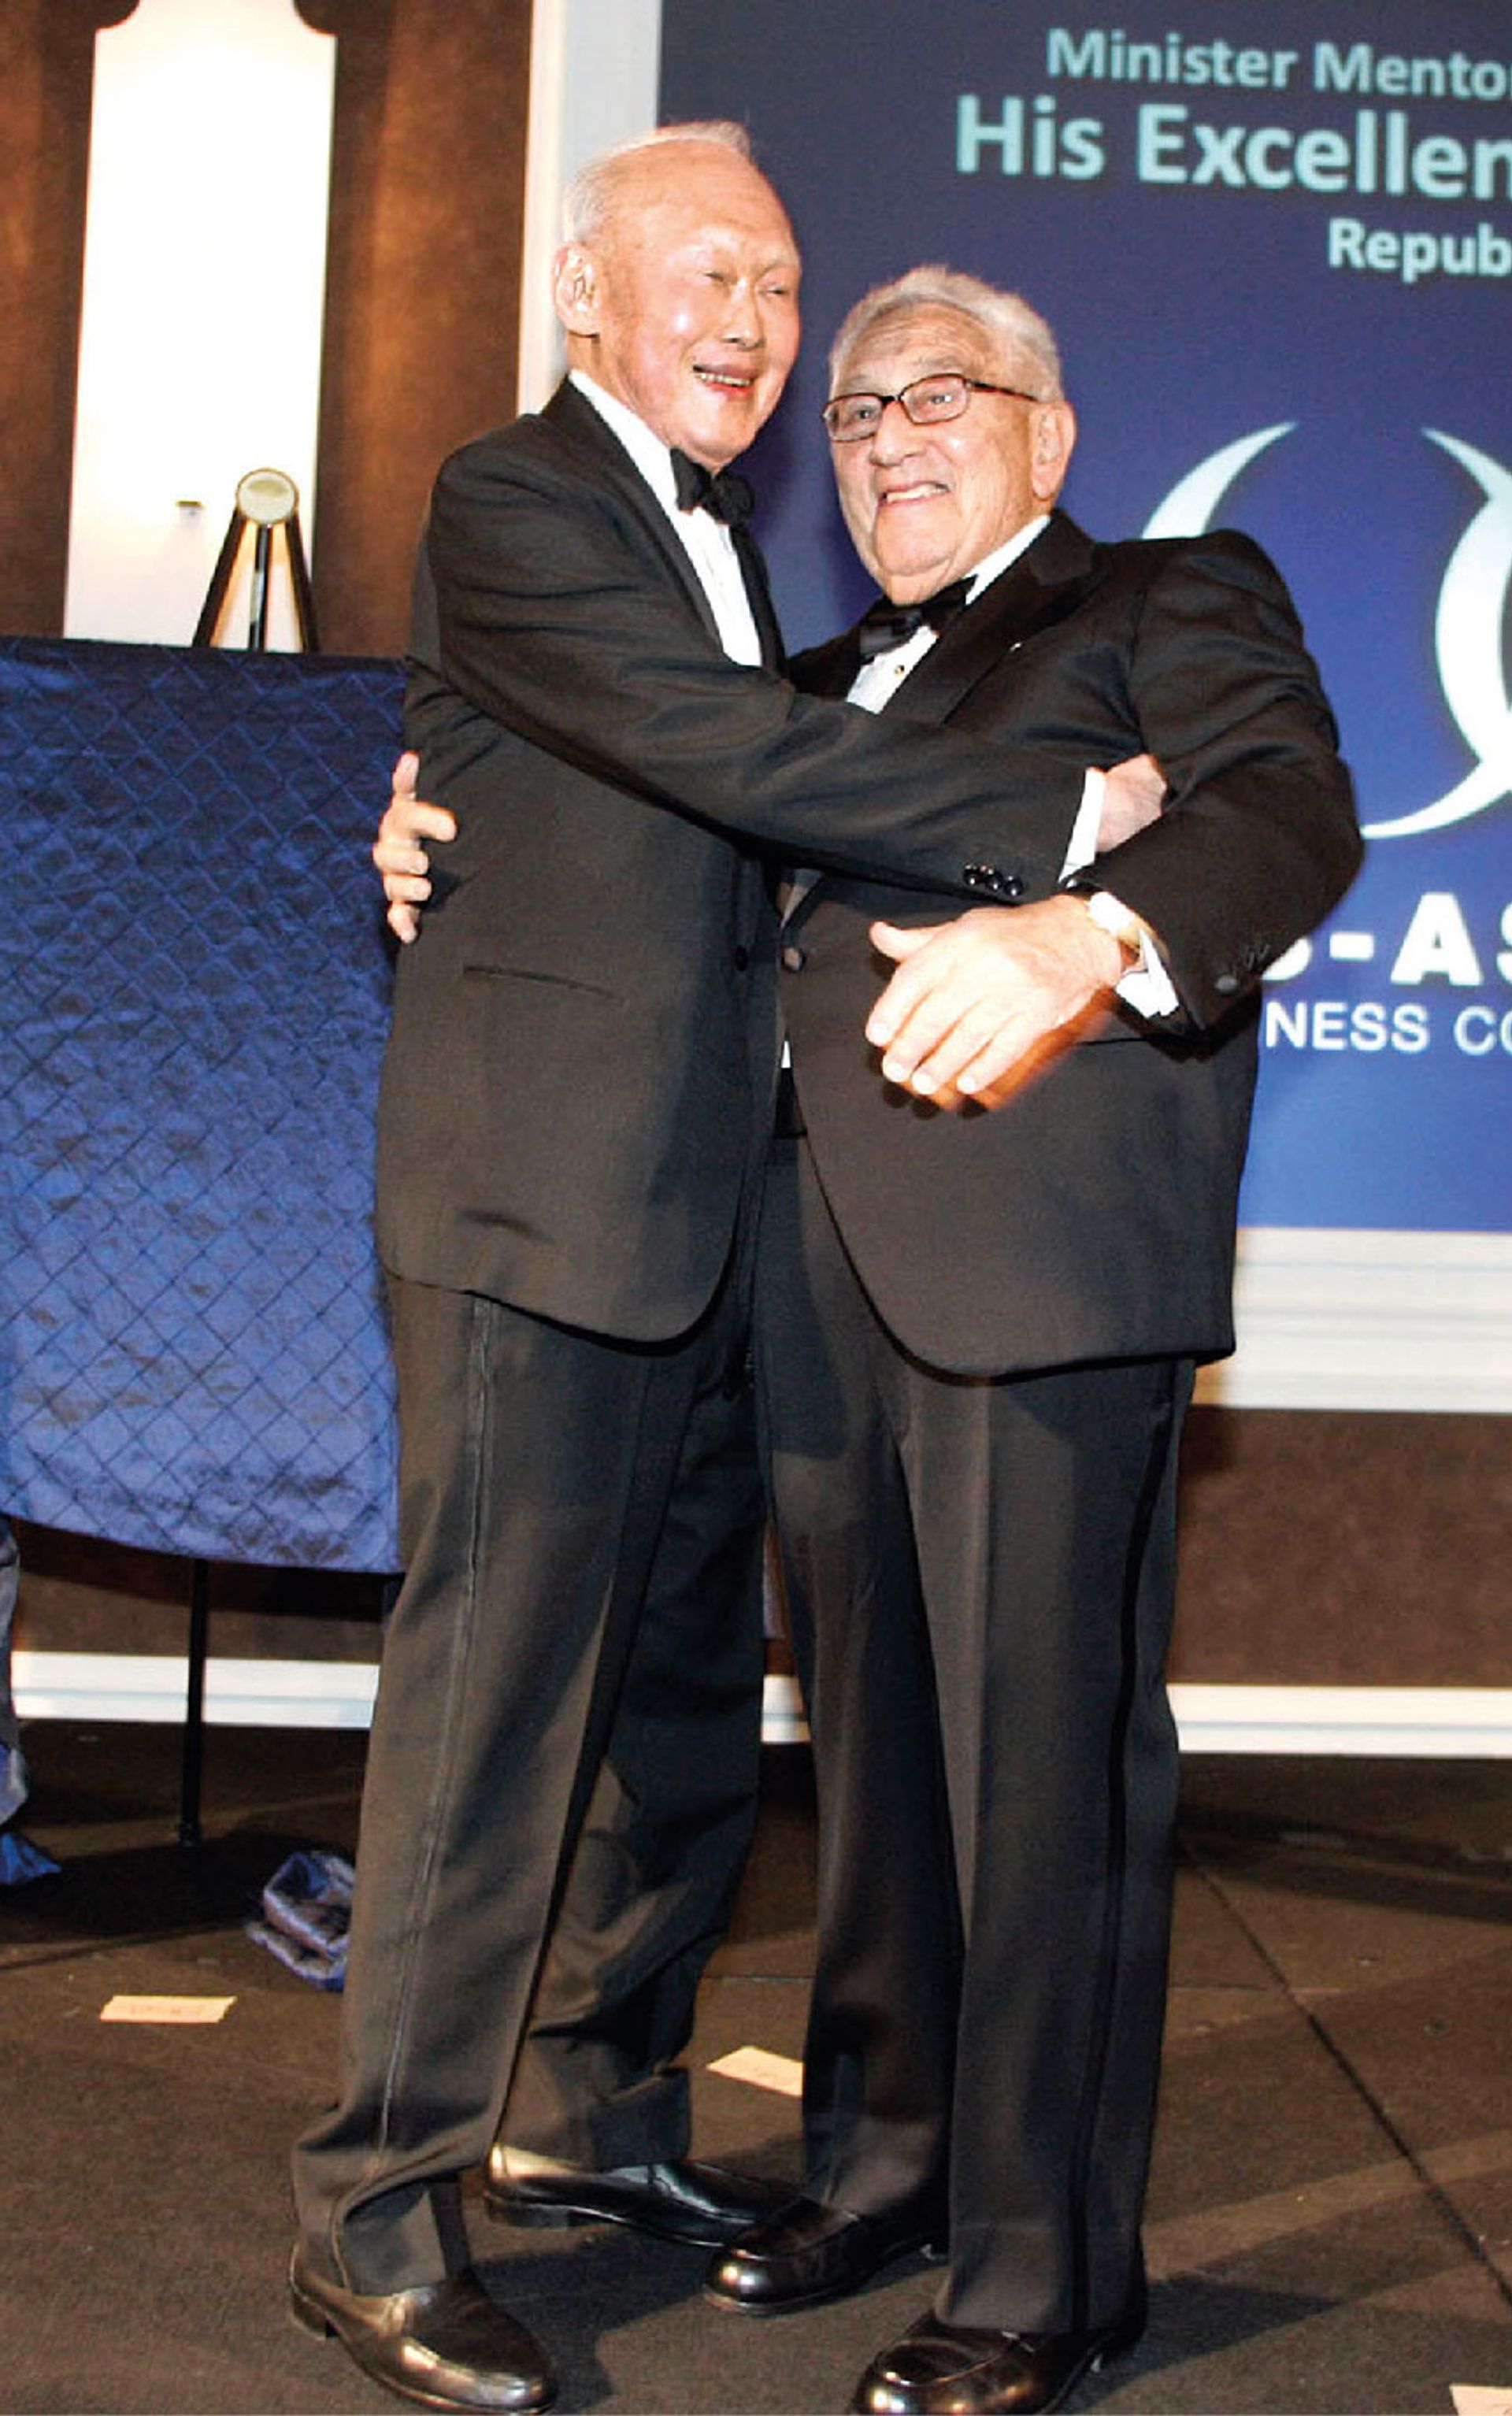 Dr Henry Kissinger giving Mr Lee a hug just before the latter received a lifetime achievement award from the US-Asean Business Council, which aims to foster ties between the United States and Asean, in Washington on Oct 27, 2009. Dr Kissinger paid tribute to Mr Lee after the latter’s death in a piece in The Washington Post, titled “The World Will Miss Lee Kuan Yew”. In this eulogy, he reminisced about his old friend: “Lee Kuan Yew was a great man. And he was a close personal friend, a fact that I consider one of the great blessings of my life. A world needing to distil order from incipient chaos will miss his leadership.” ST Photo: Chua Chin Hon